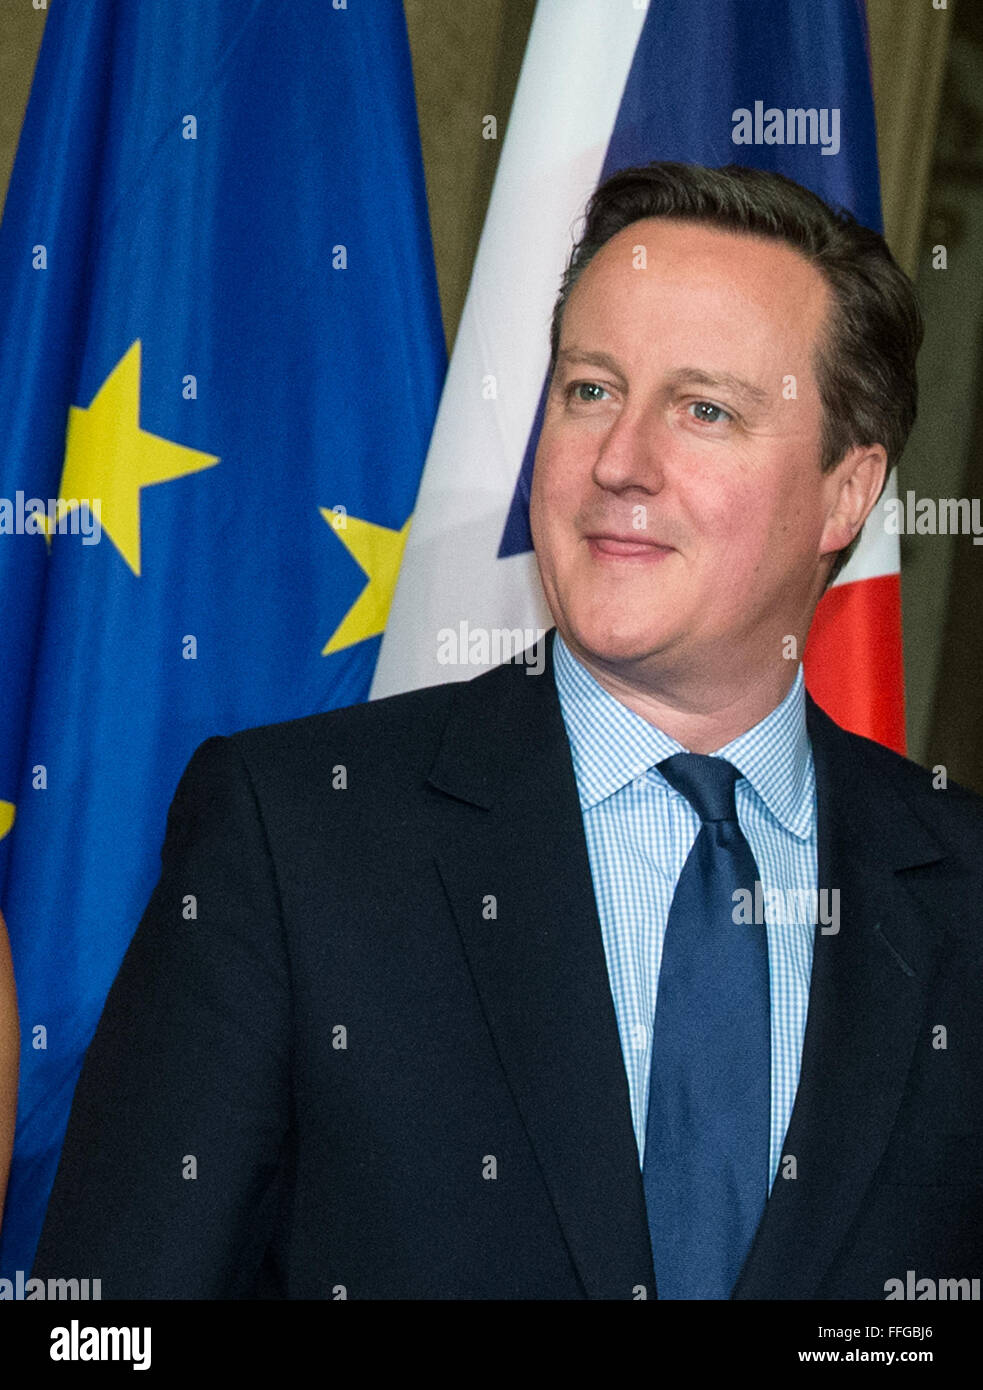 Hamburg, Germany. 12th Feb, 2016. Britain's Prime Minister David Cameron is received by Hamburg's First Mayor Olaf Scholz (not pictured) prior to the annual Matthiae dinner at the city hall of Hamburg, Germany, 12 February 2016. Britain's Prime Minister David Cameron and German Chancellor Angela Merkel are guests of honour at the oldest feast in the world. Since 1356, the leaders of the Hansa city invite distinguished guests to the Matthiae dinner. Photo: CHRISTIAN CHARISIUS/dpa/Alamy Live News Stock Photo